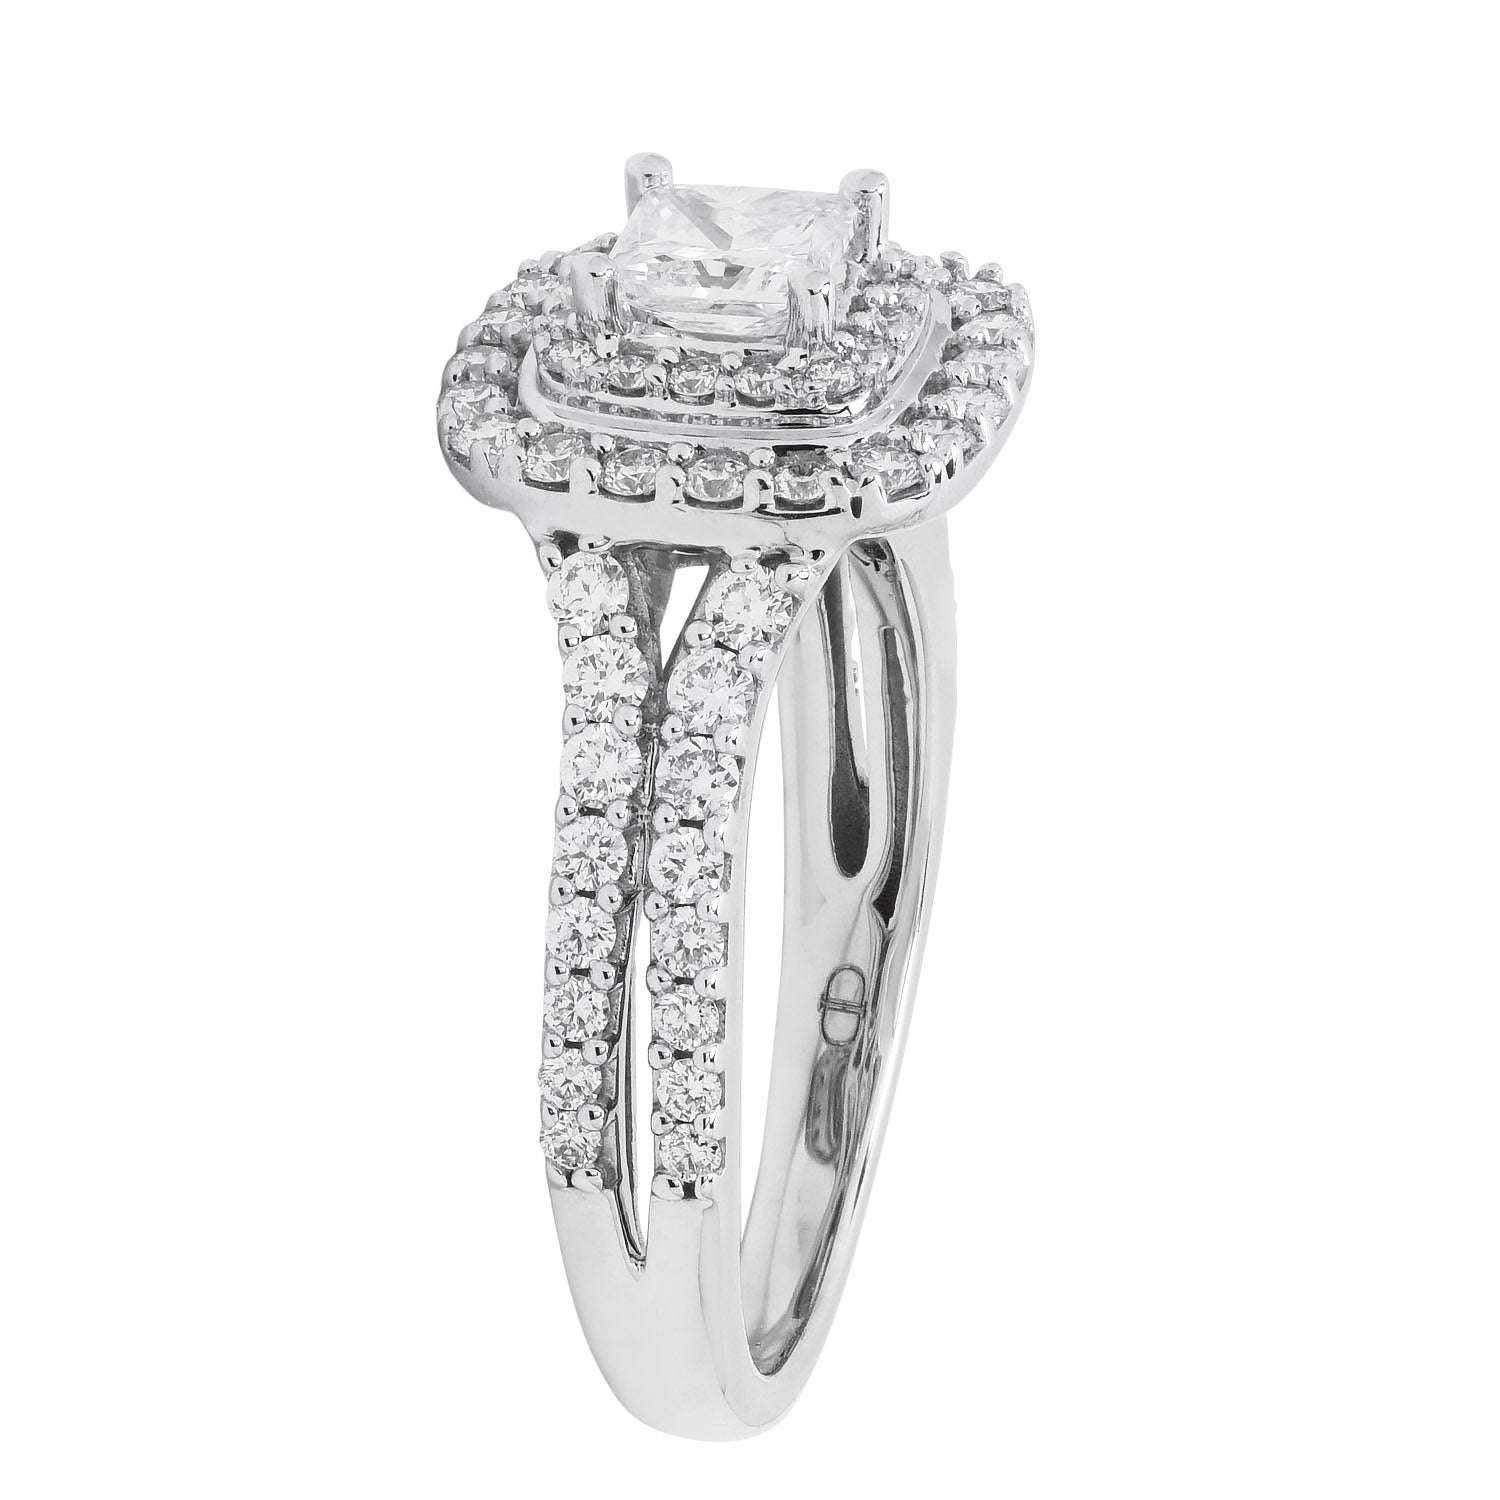 Princess Cut Diamond Halo Engagement Ring in 14kt White Gold (1 1/14ct tw)